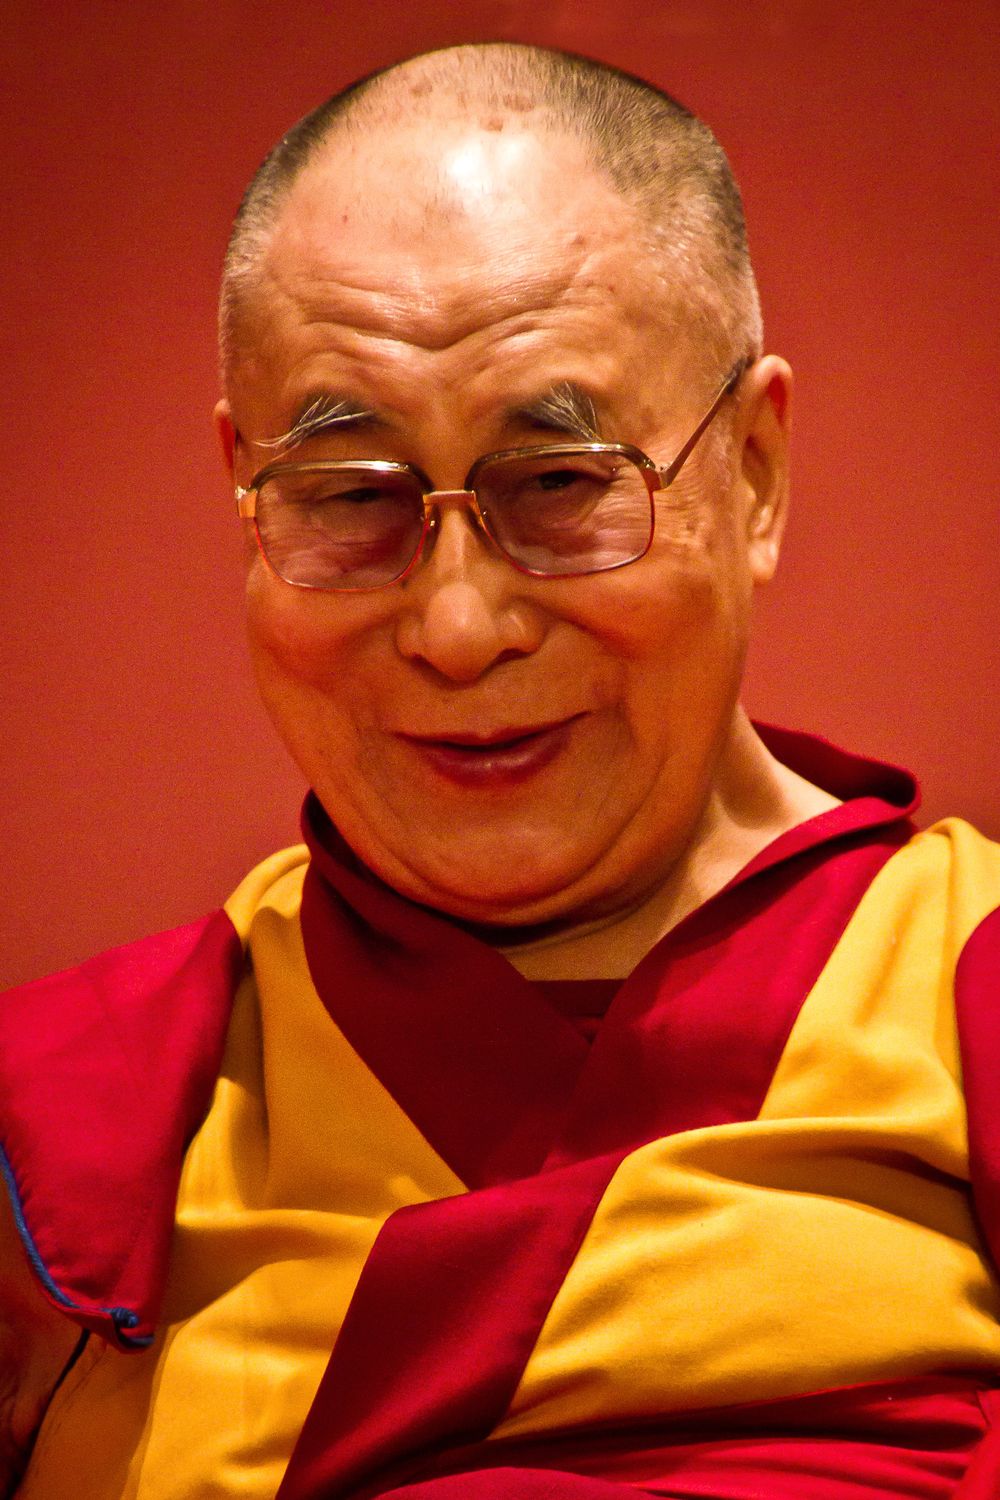 The Teachings of the Dalai Lama Might Change your Life